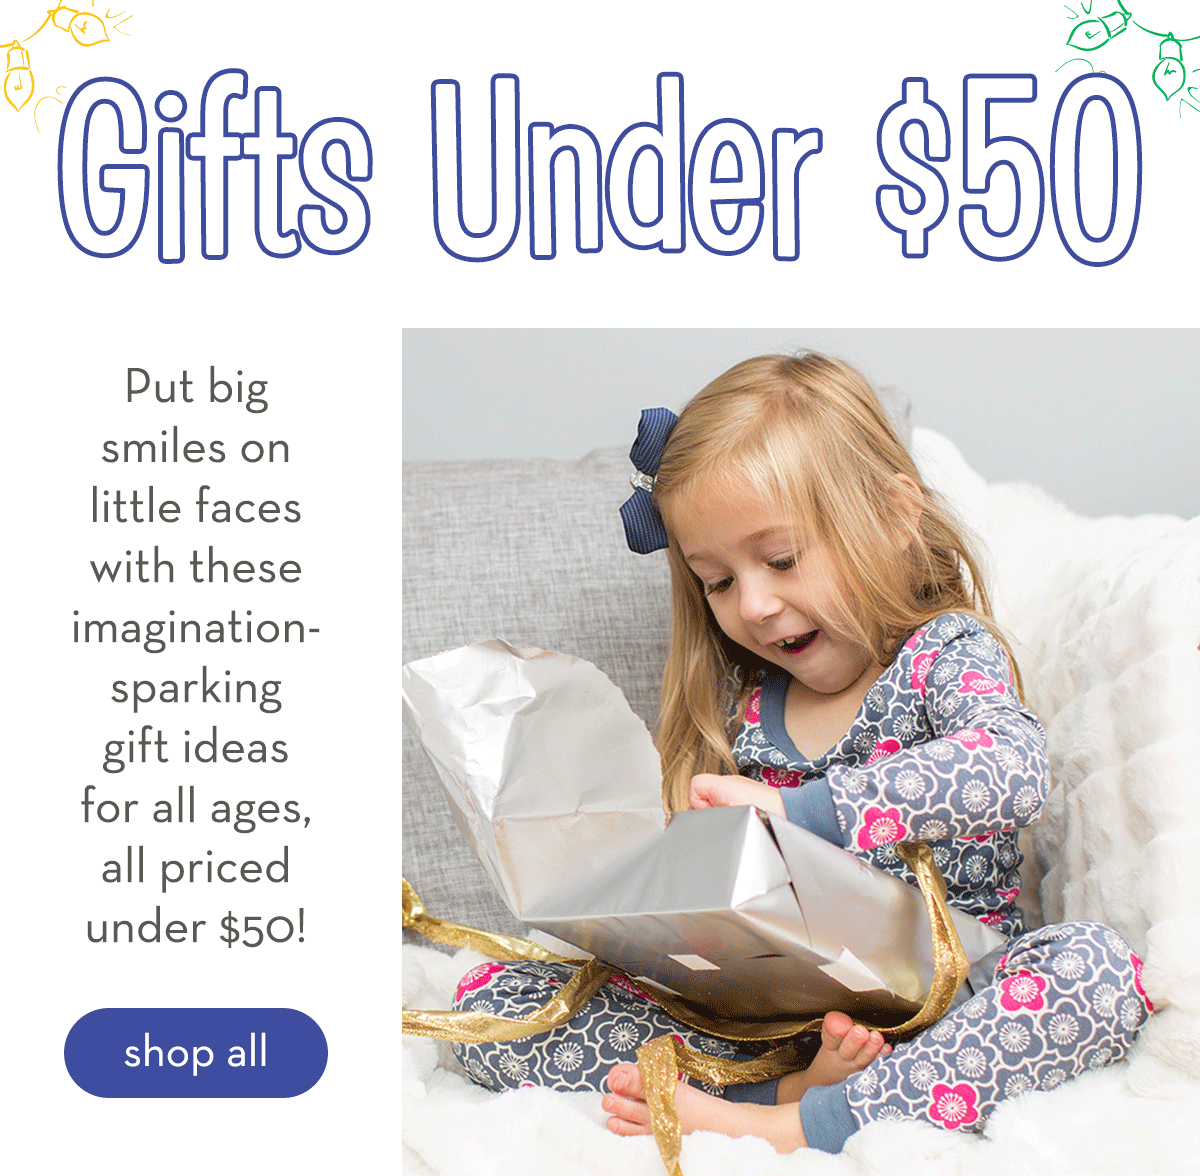 Gifts Under $50 - Put big smiles on little faces with these imagination-sparking gift ideas for all ages, all priced under $50! Shop all.